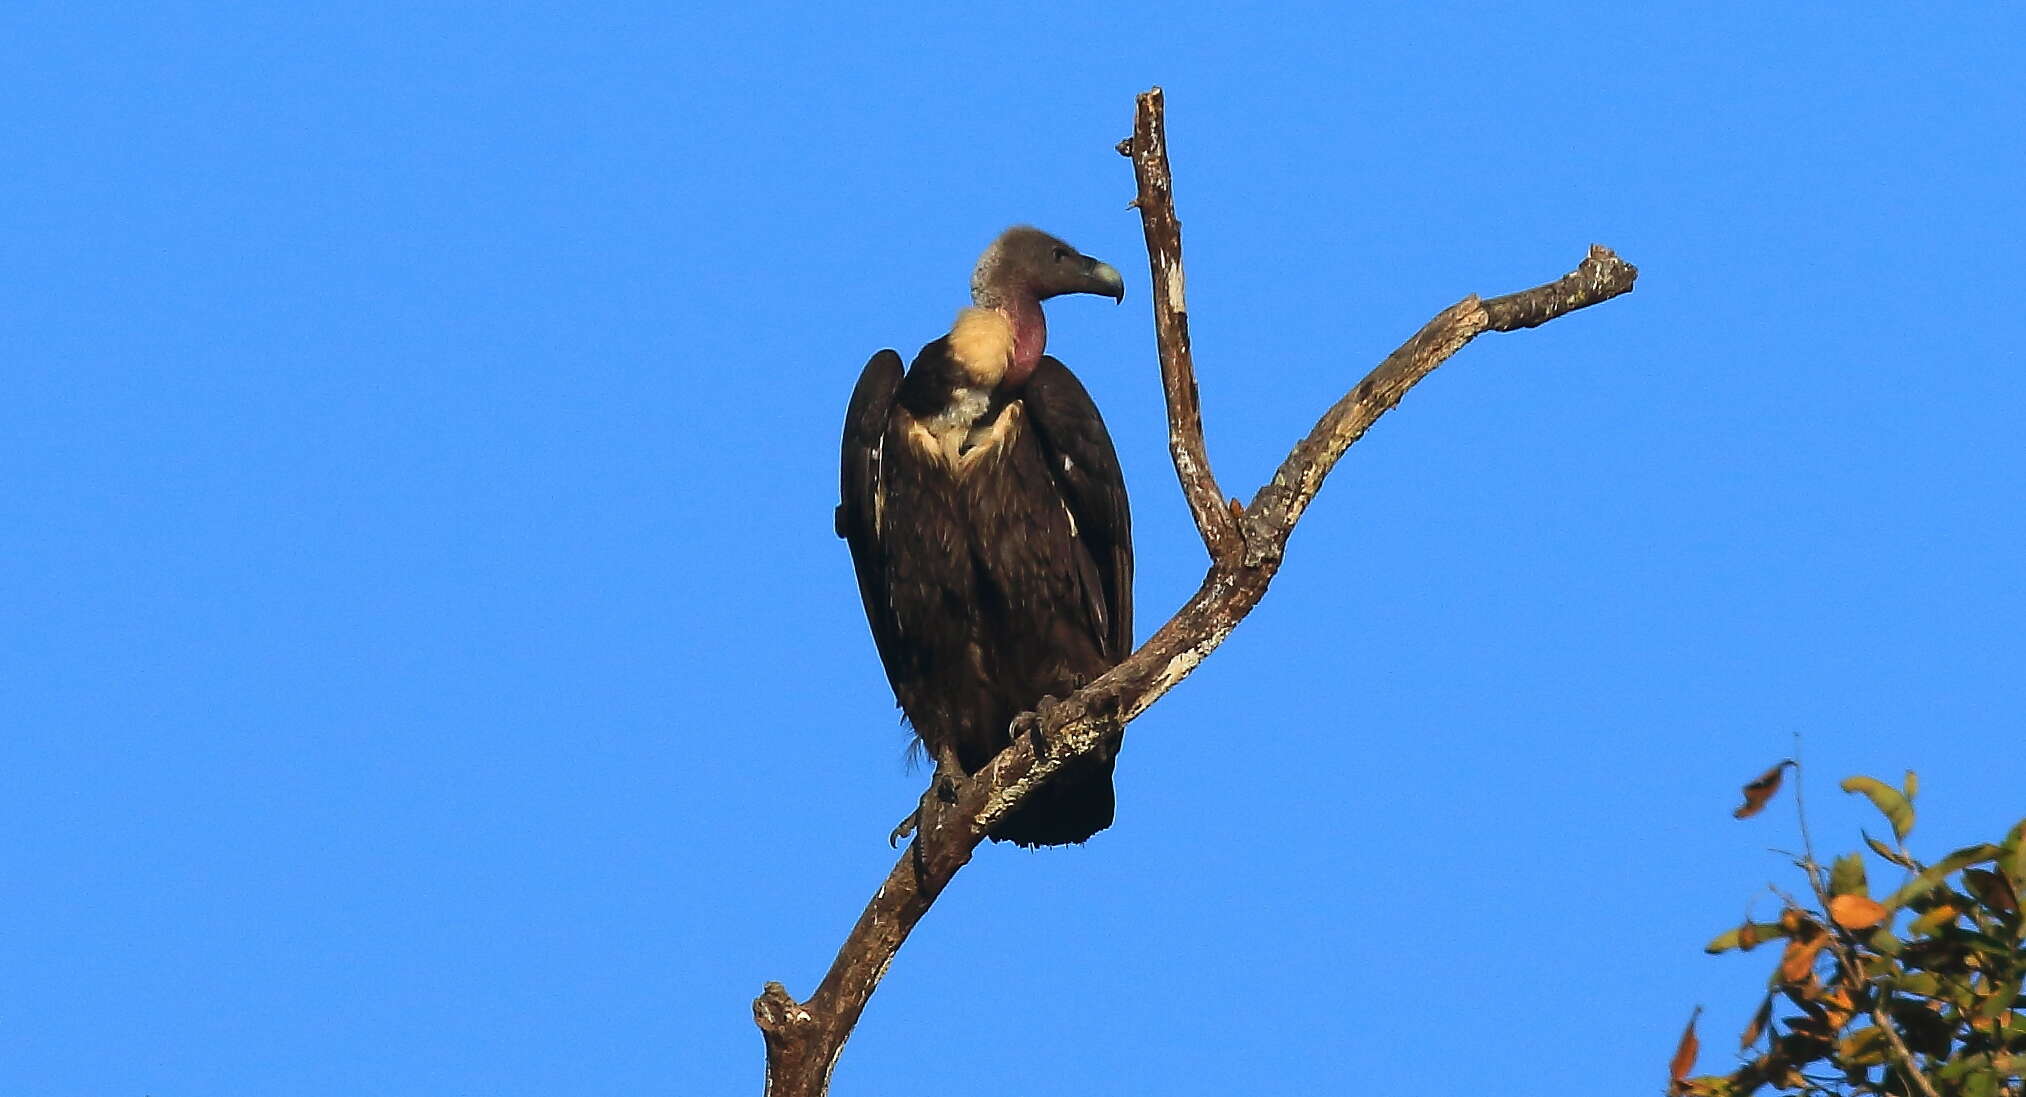 Image of Asian White-backed Vulture